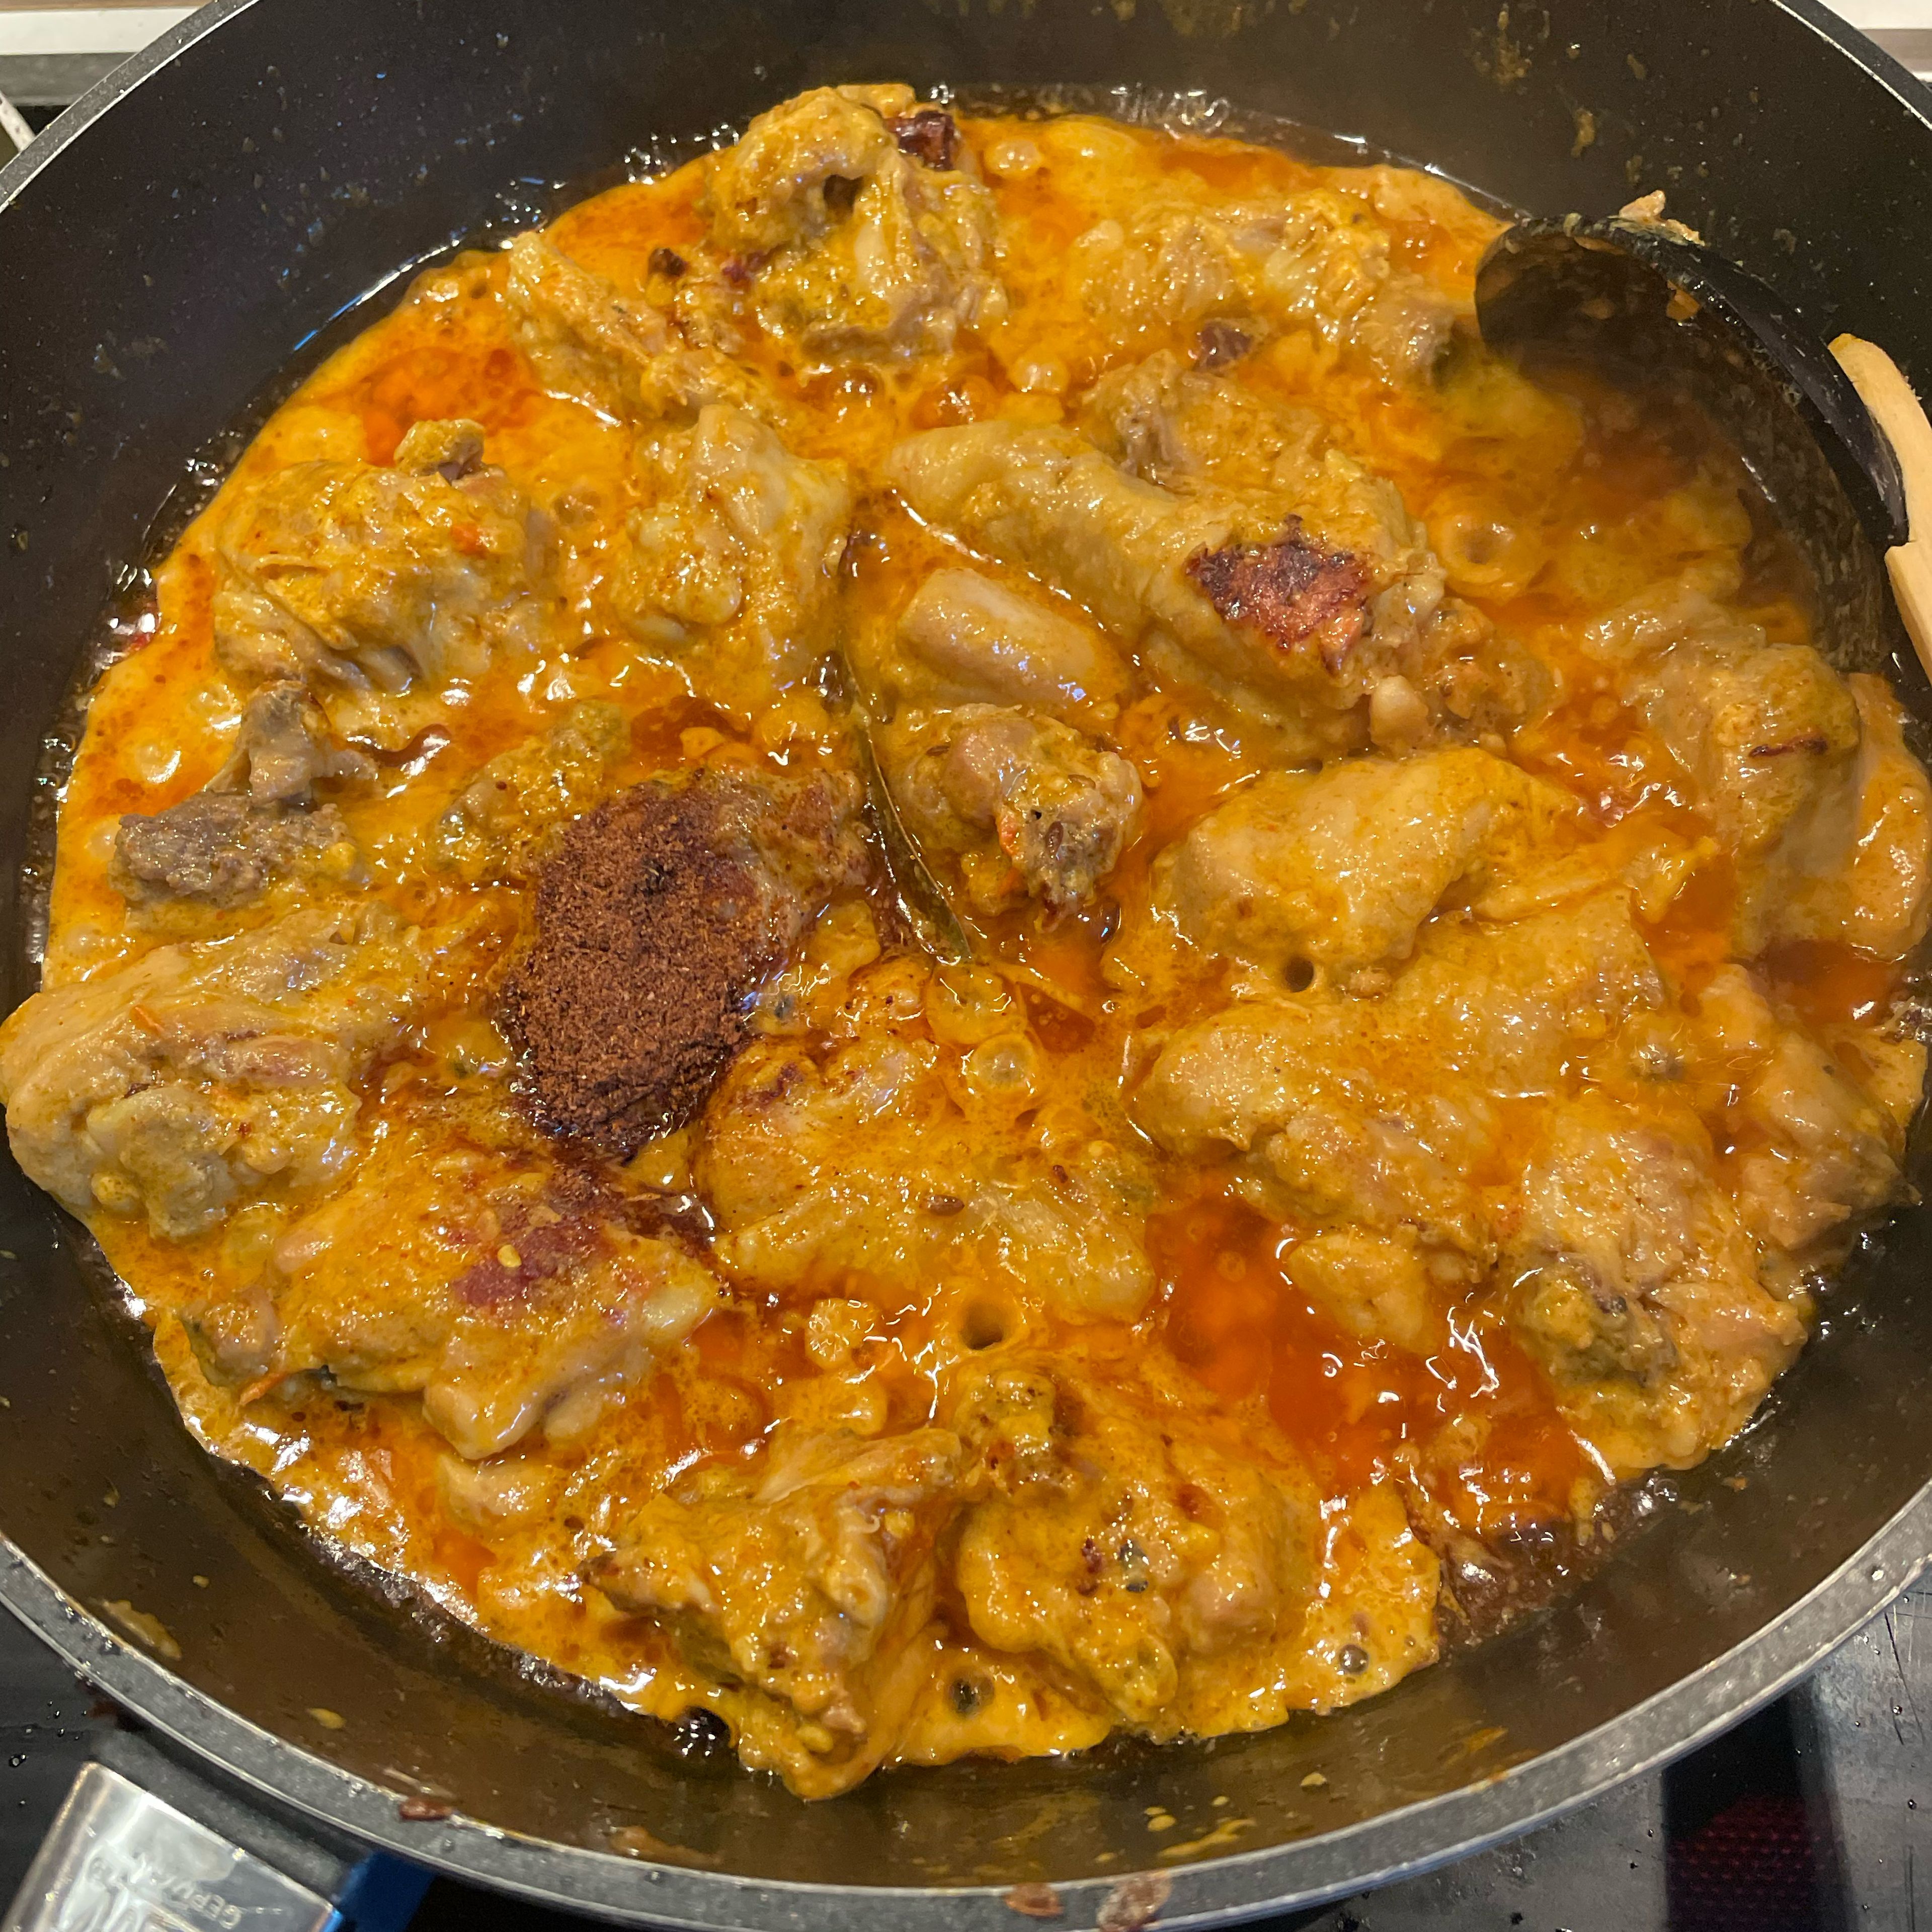 Uncover, stir in the remaining spices (nutmeg, mace, garam masala). Turn the chicken, cover and simmer for 10 more minutes. Then add water, bring to a boil and keep simmering another 2-3 minutes. You can garnish the dish with cilantro or mint. Serve with white bread, naan, chapati or rice.